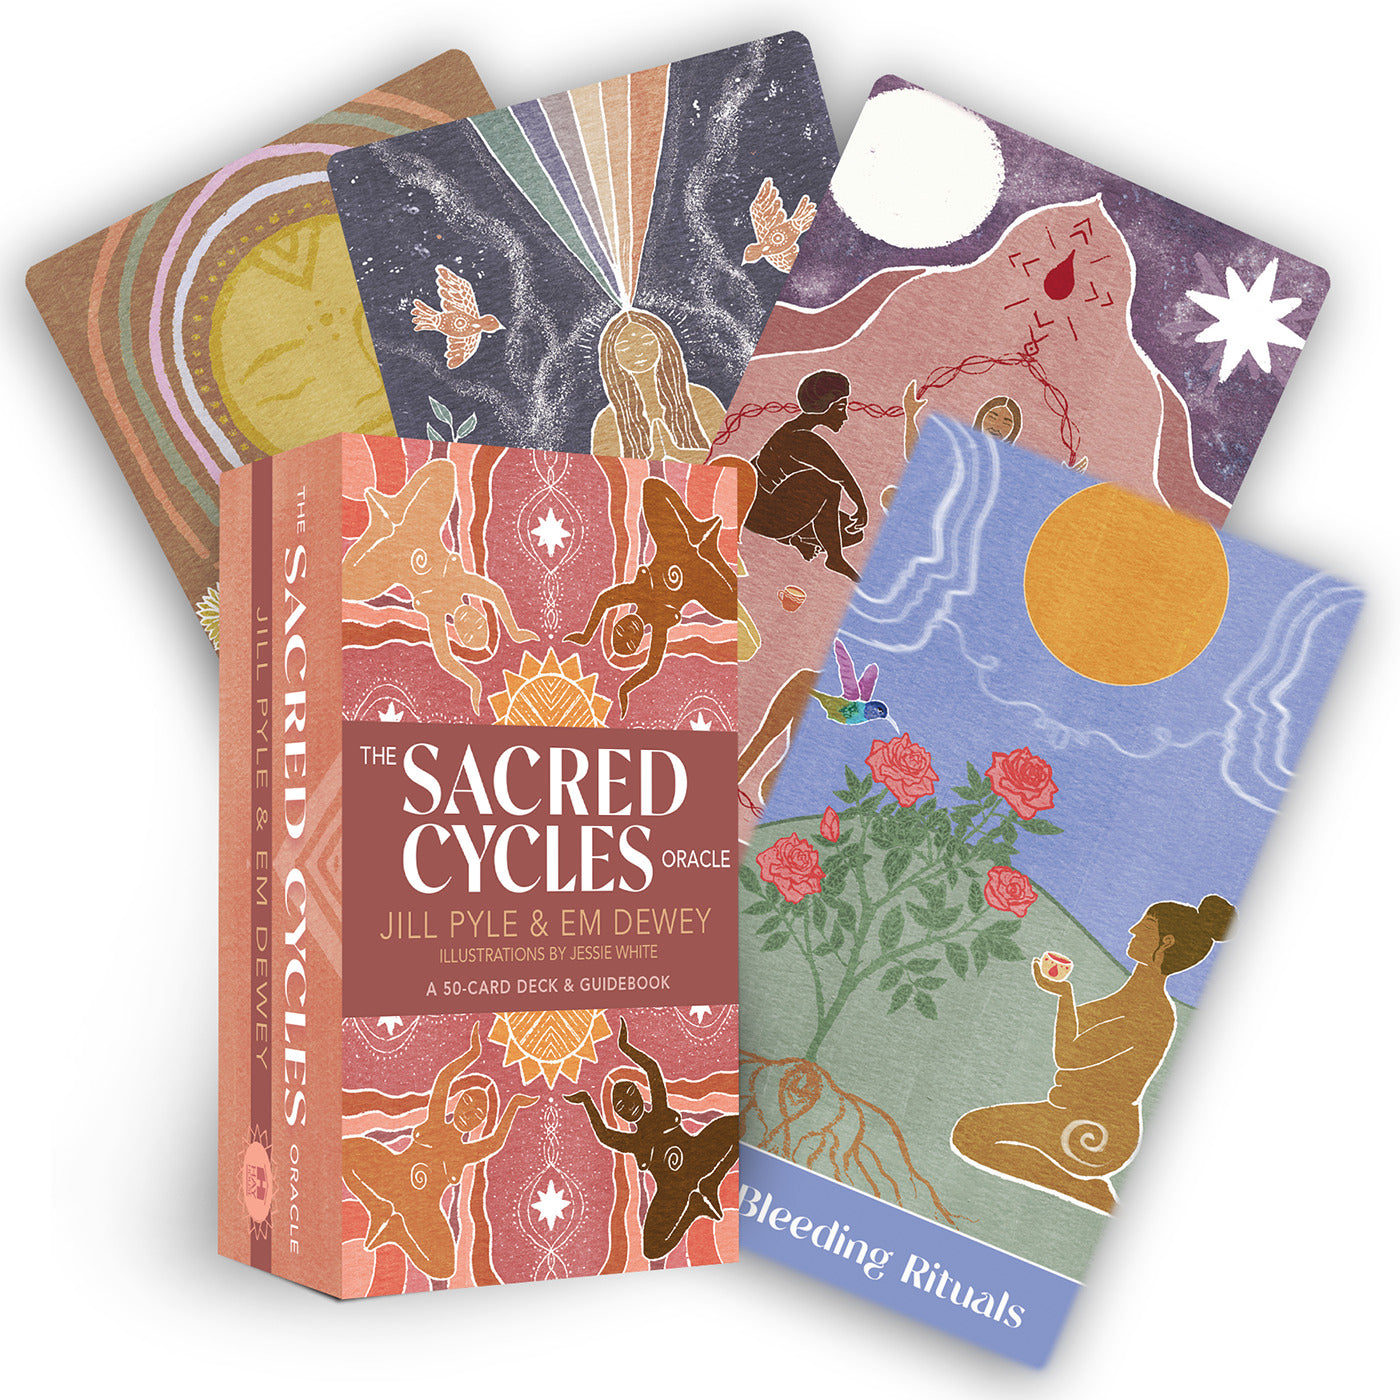 The Sacred Cycles Oracle